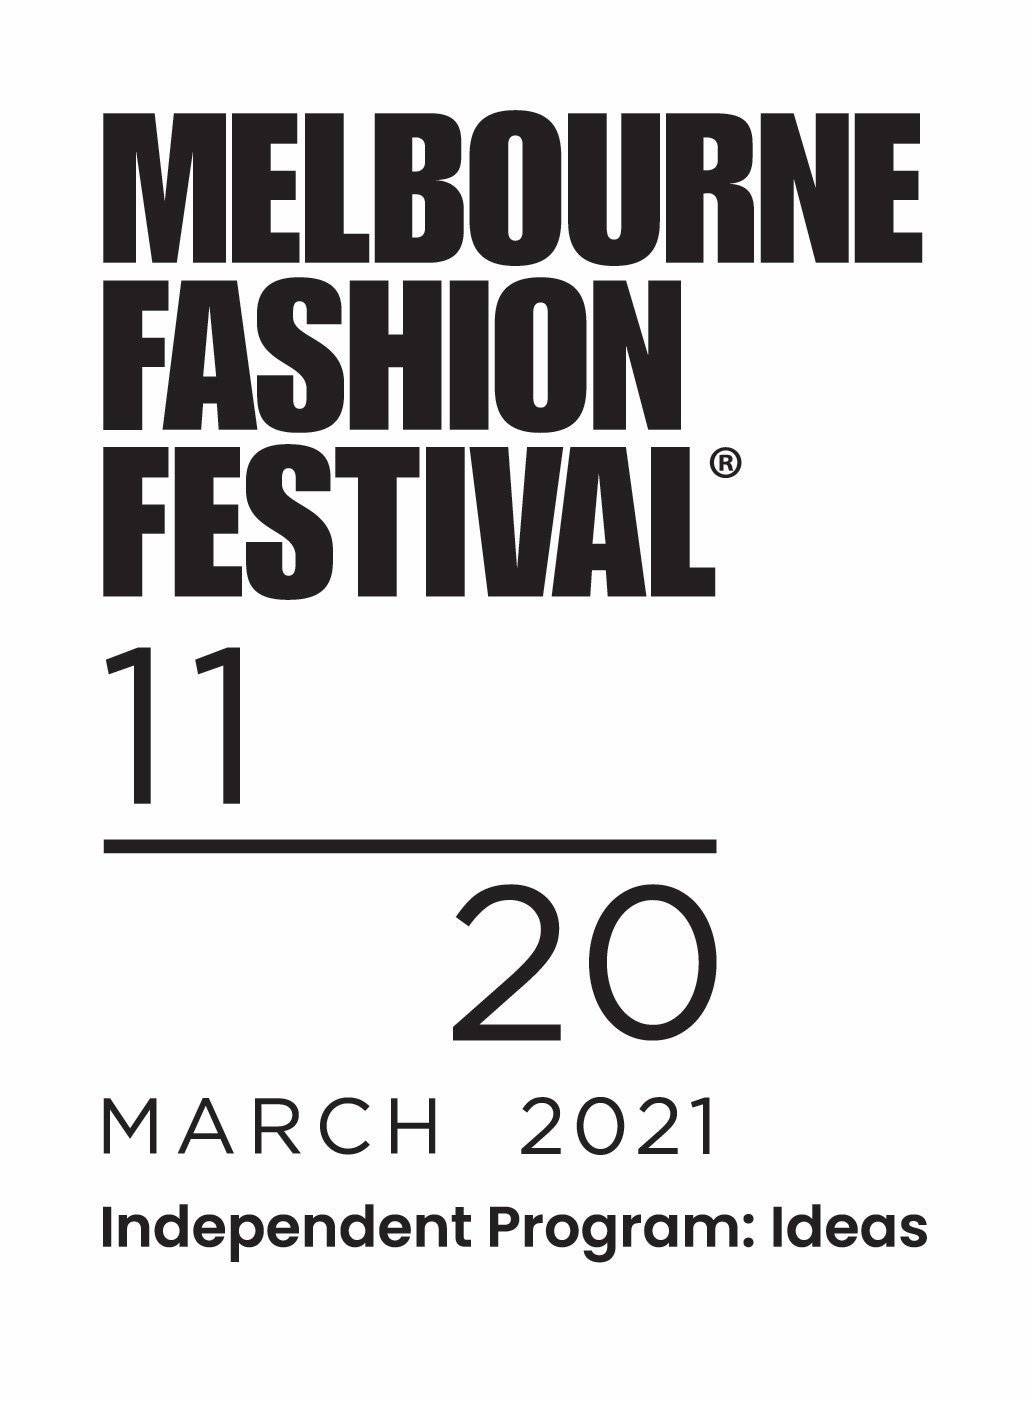 Cocktail Revolution's event as part of the Melbourne Fashion fe